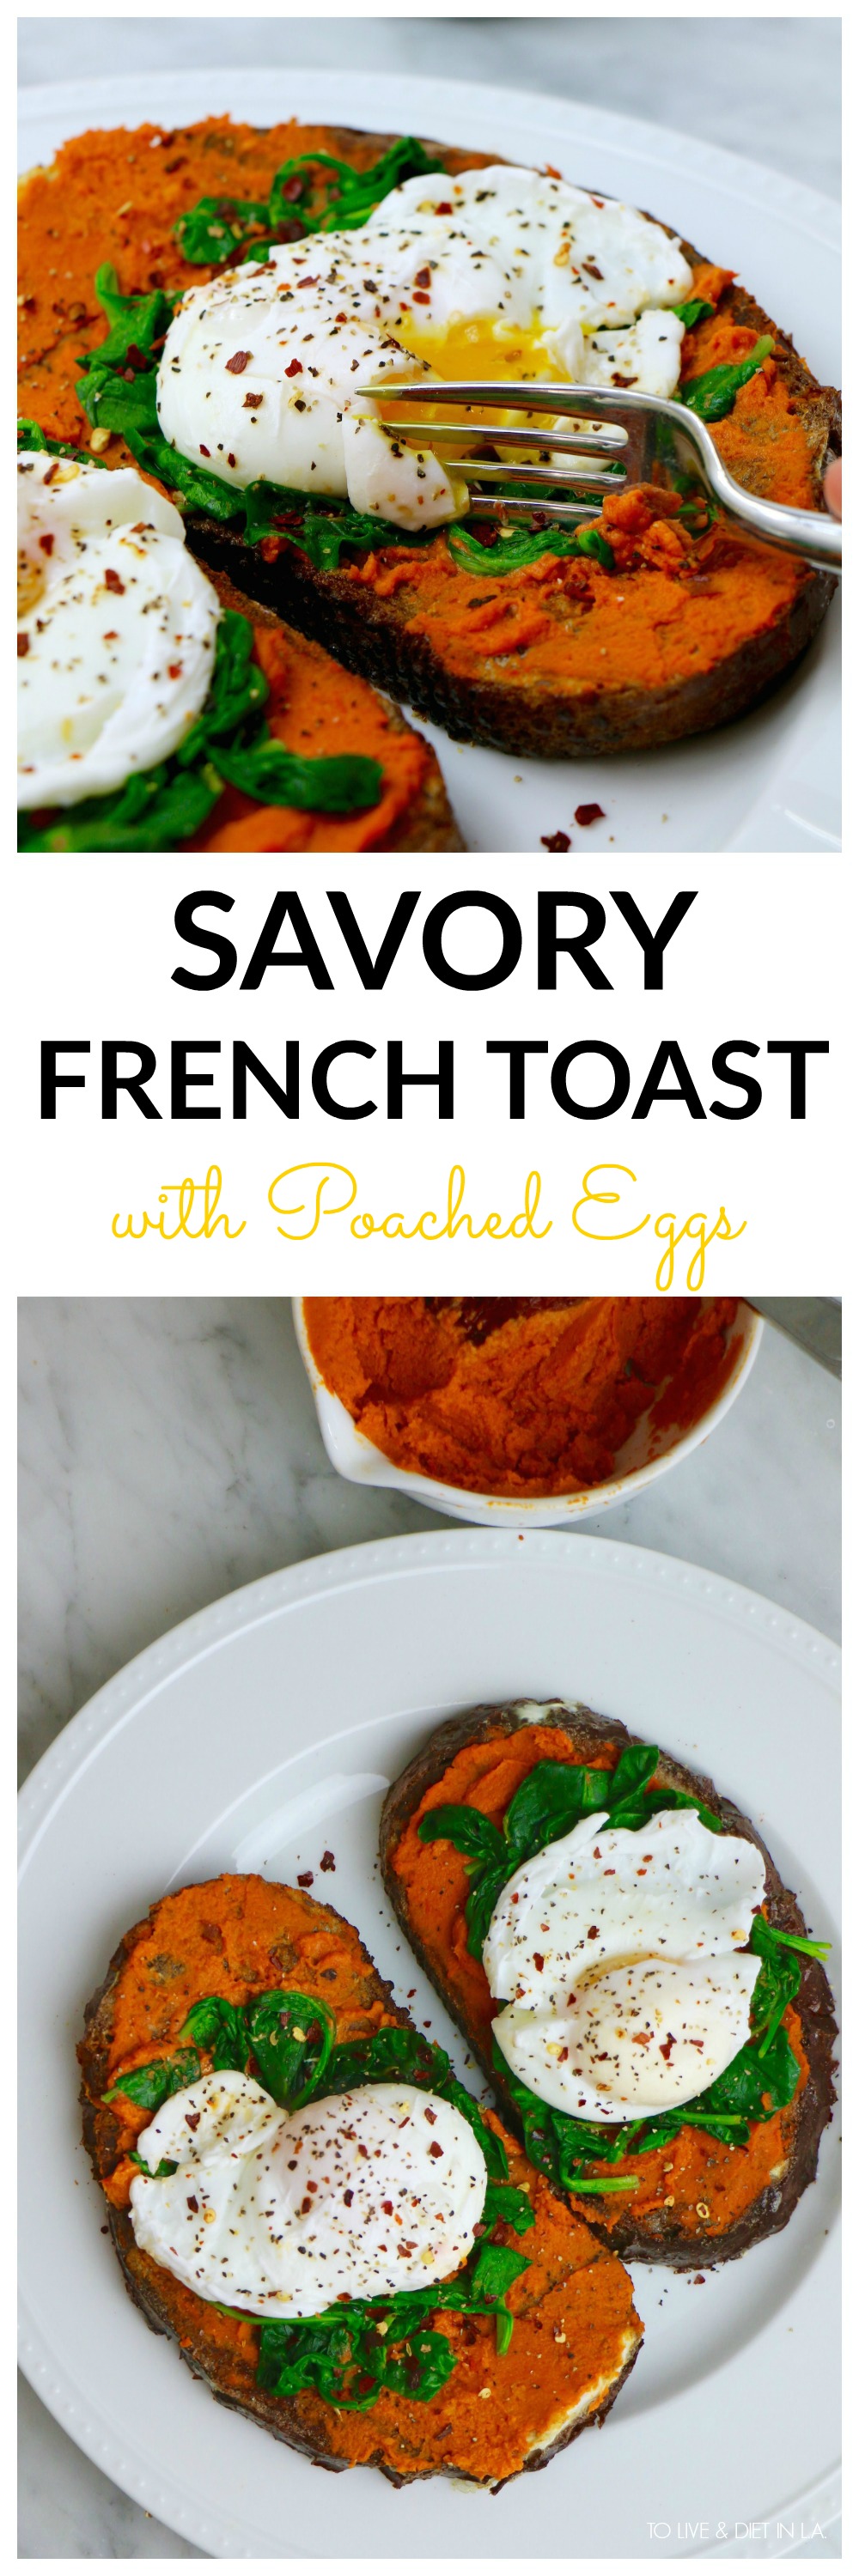 Savory French Toast with Poached Eggs PIN